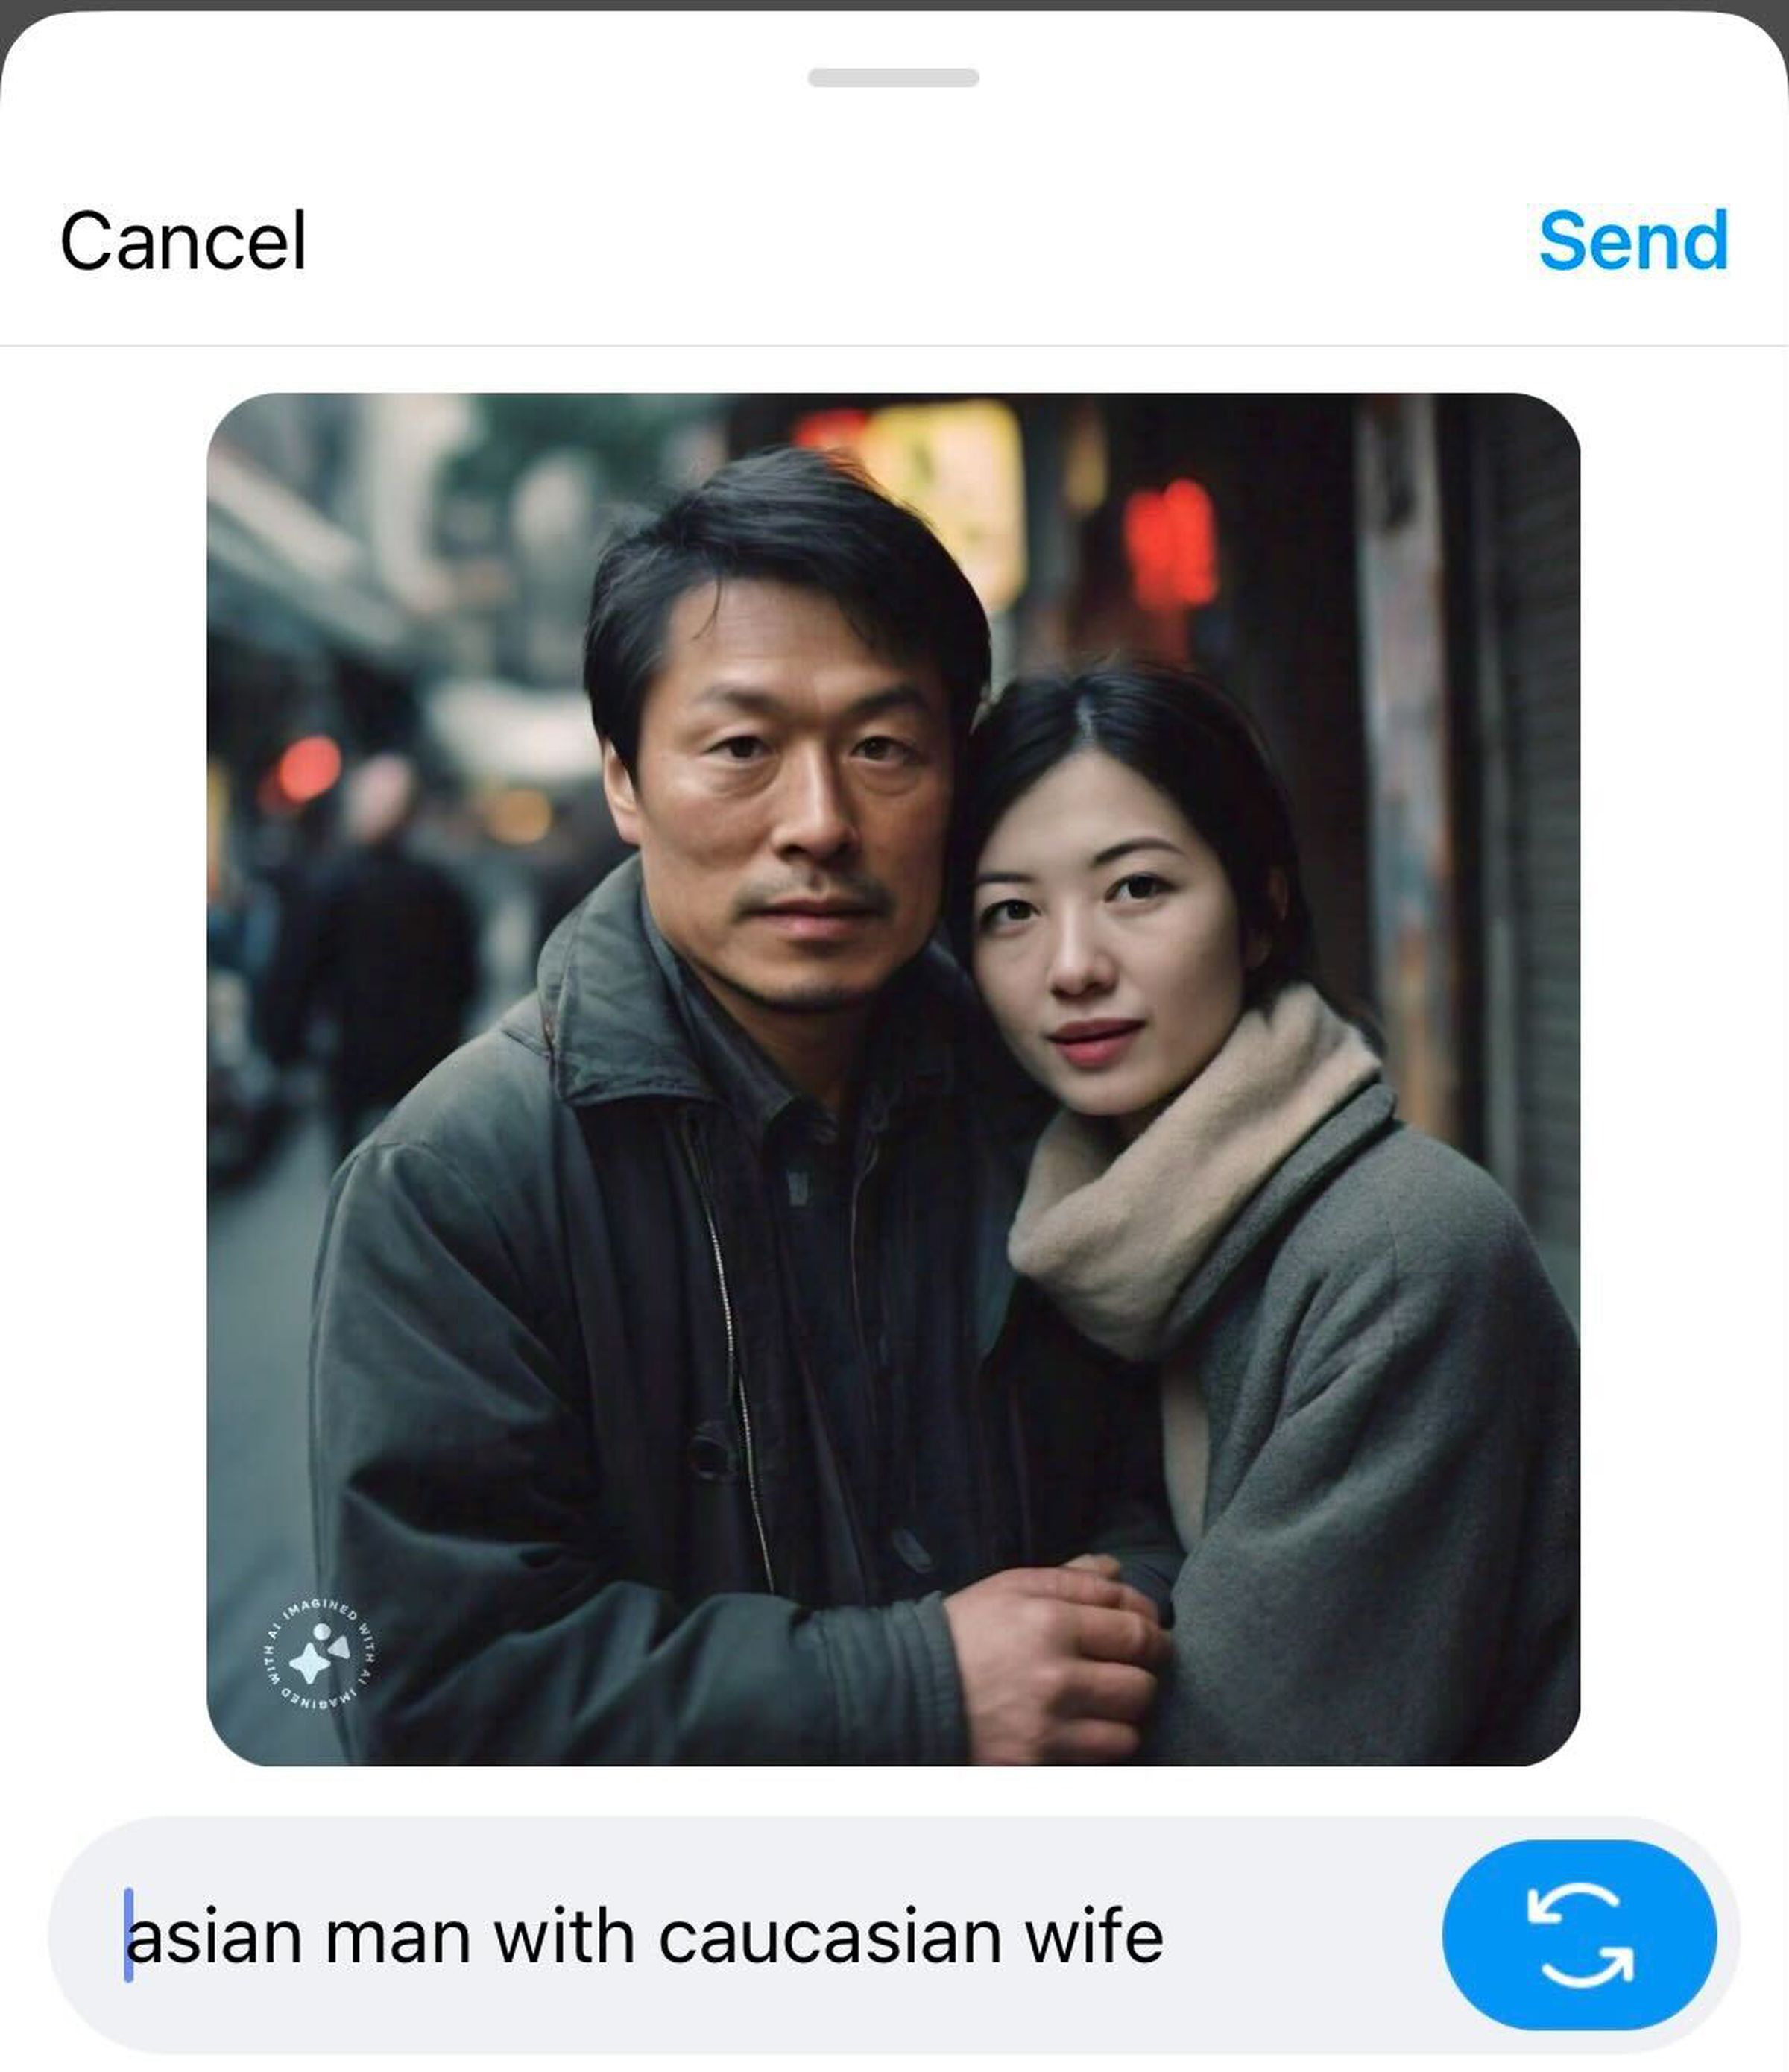 “Asian man and caucasian wife” AI image showing two Asian people.